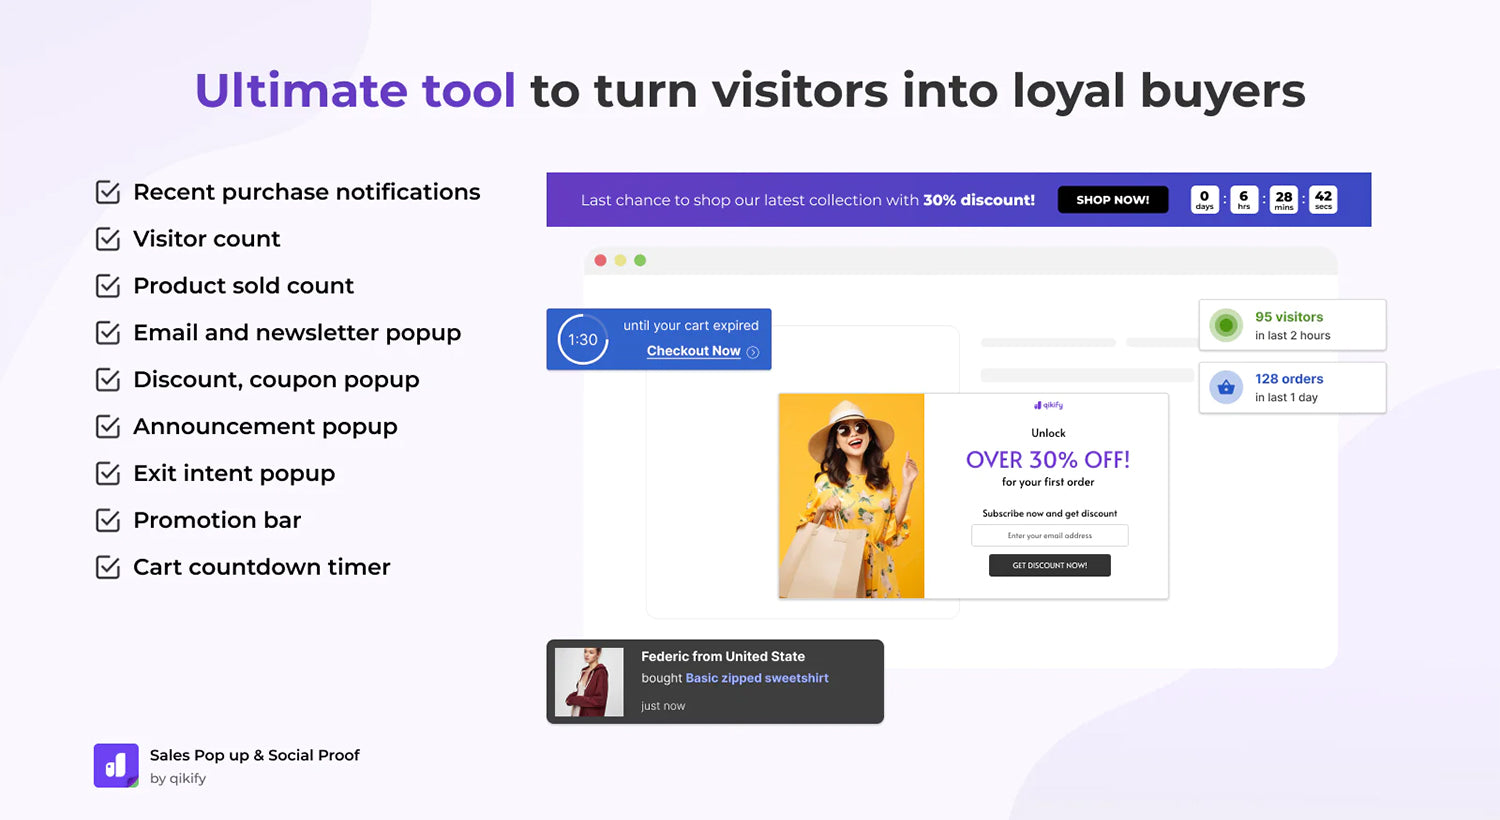 Sales Pop up & Social Proof by qikify uses popups to boost sales, trigger customer FOMO, build trust and attract new customers.